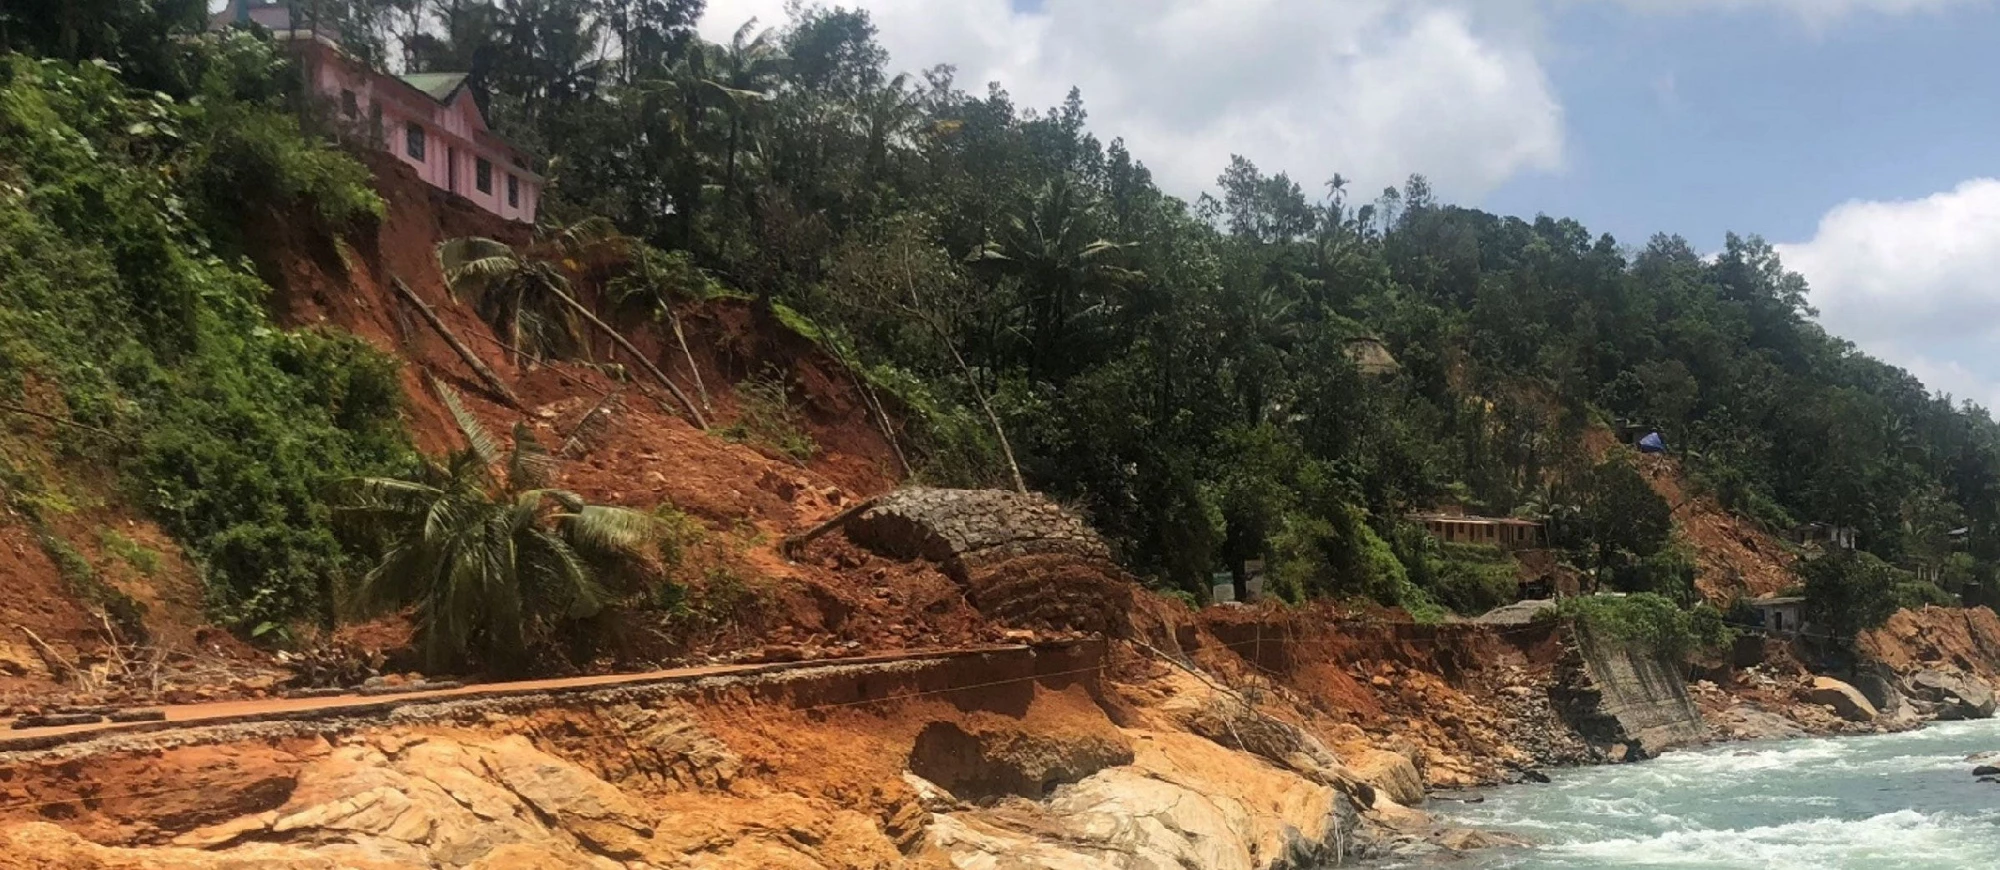 Landslide susceptibility mapping shows the areas that are likely to be affected by future landslides. Photo: Thomas Oommen